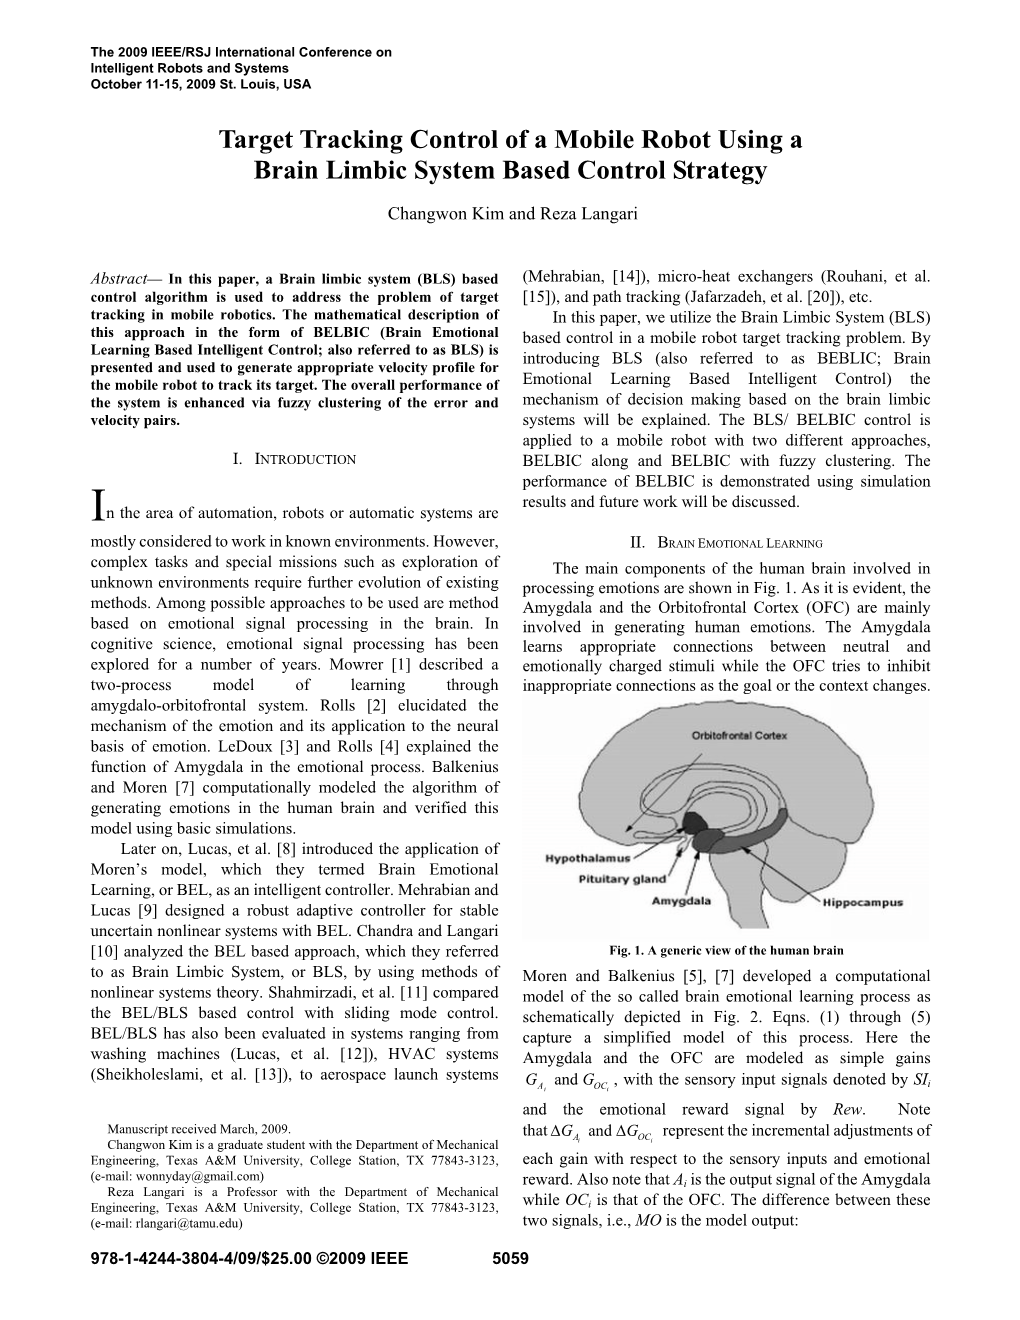 Target Tracking Control of a Mobile Robot Using a Brain Limbic System Based Control Strategy